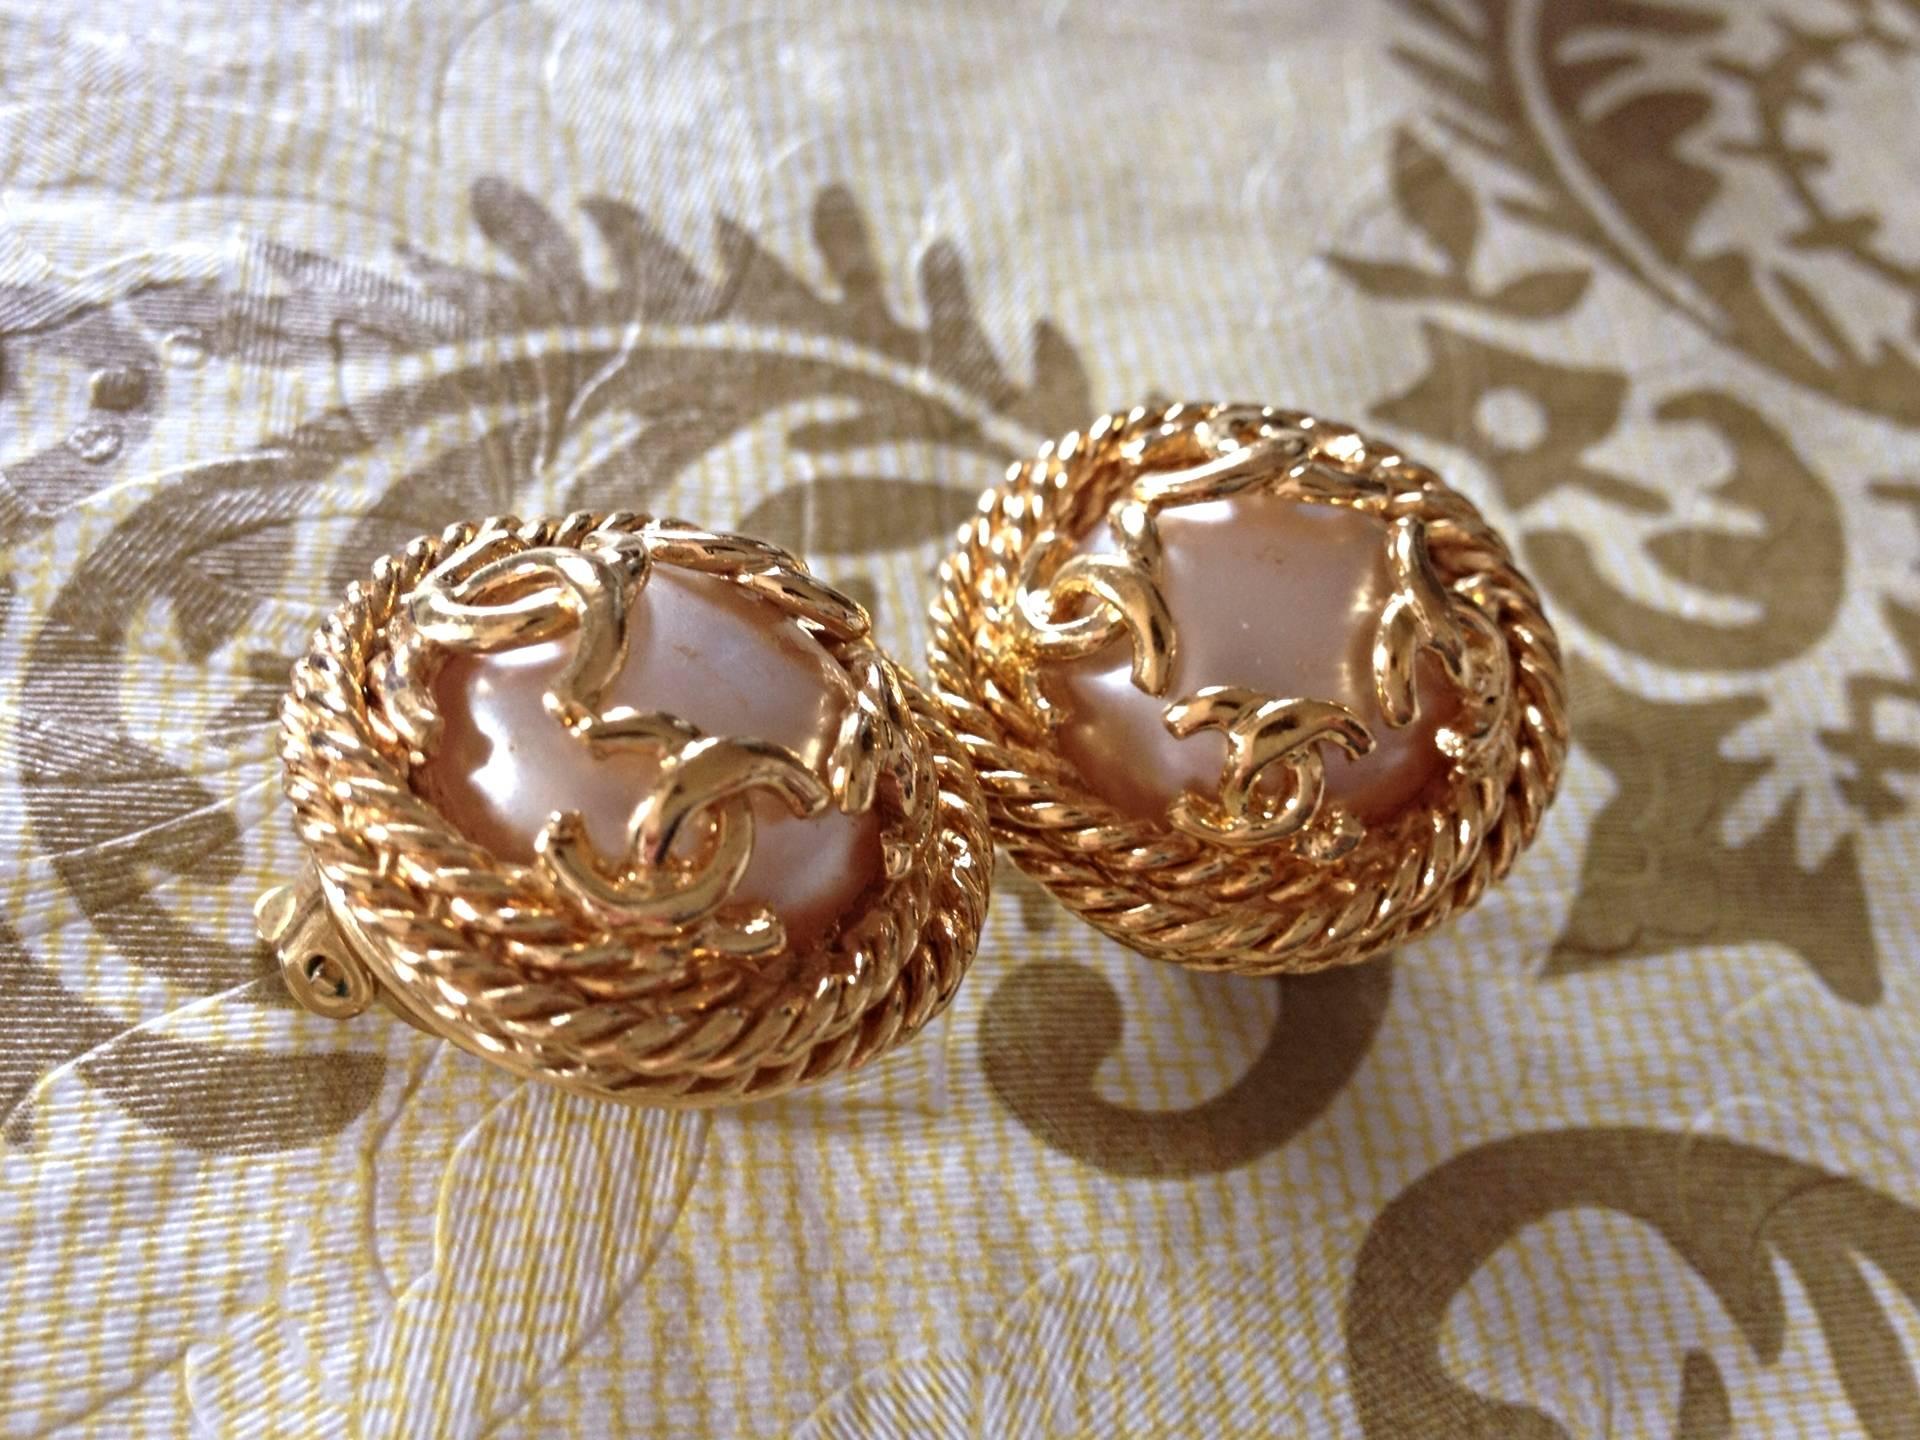 Vintage CHANEL gold tone round earrings with twisted frames, a faux pearl and CC motifs. Great and rare Chanel vintage jewelry gift.

Fun and Chic and Gorgeous CHANEL earrings for  you or your loved one!  
Great gift idea. 

Introducing a pair